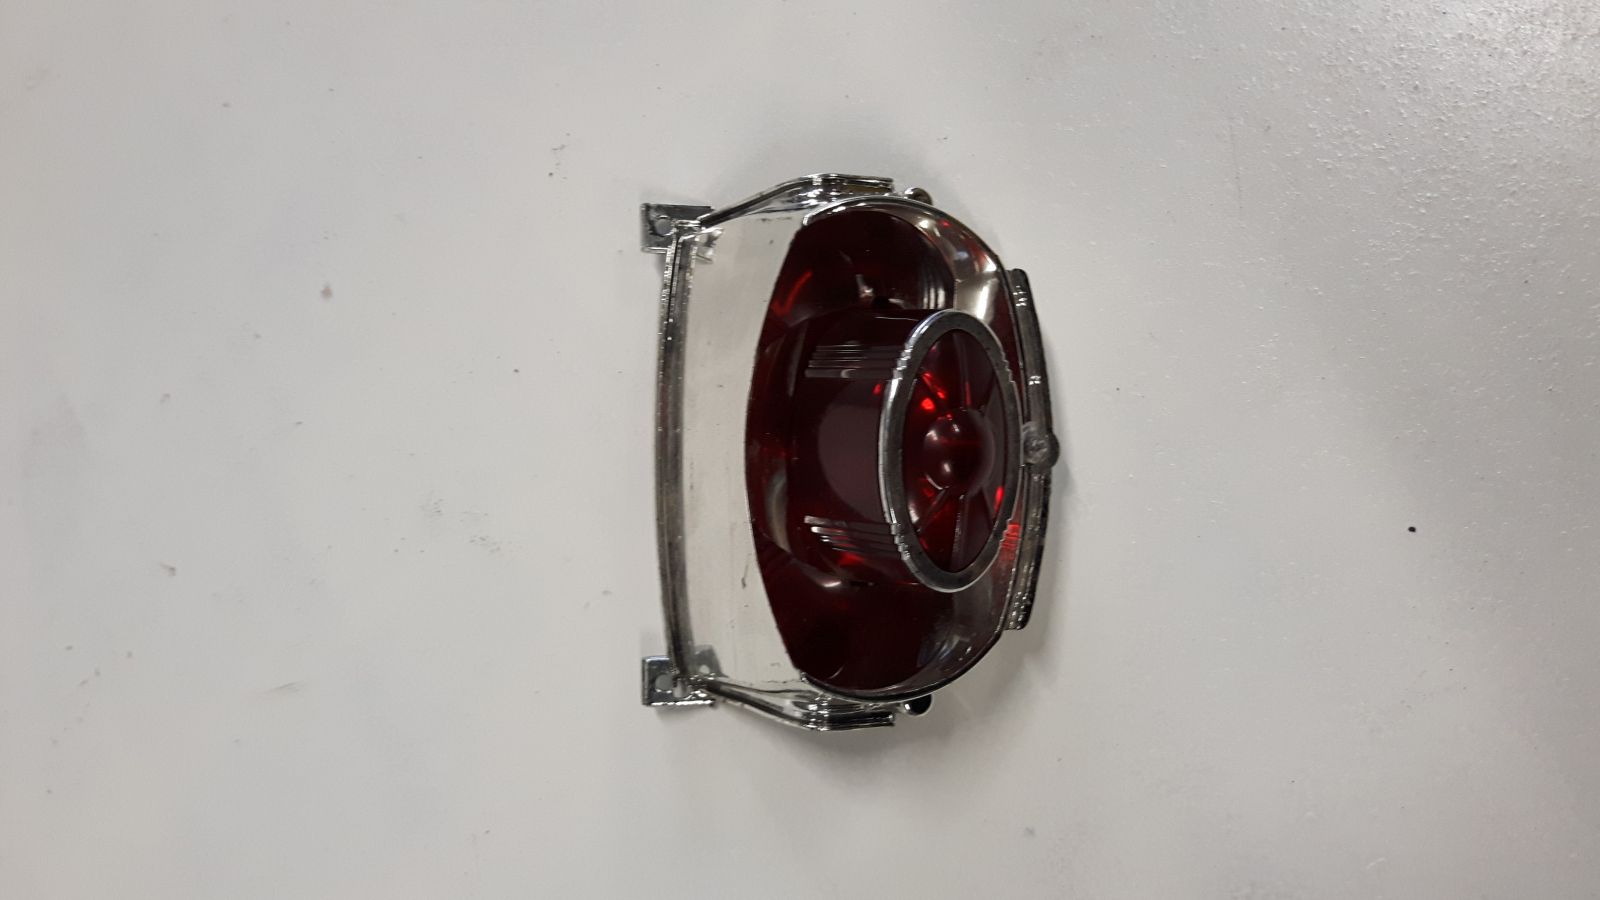 MBK Ovetto rear light part